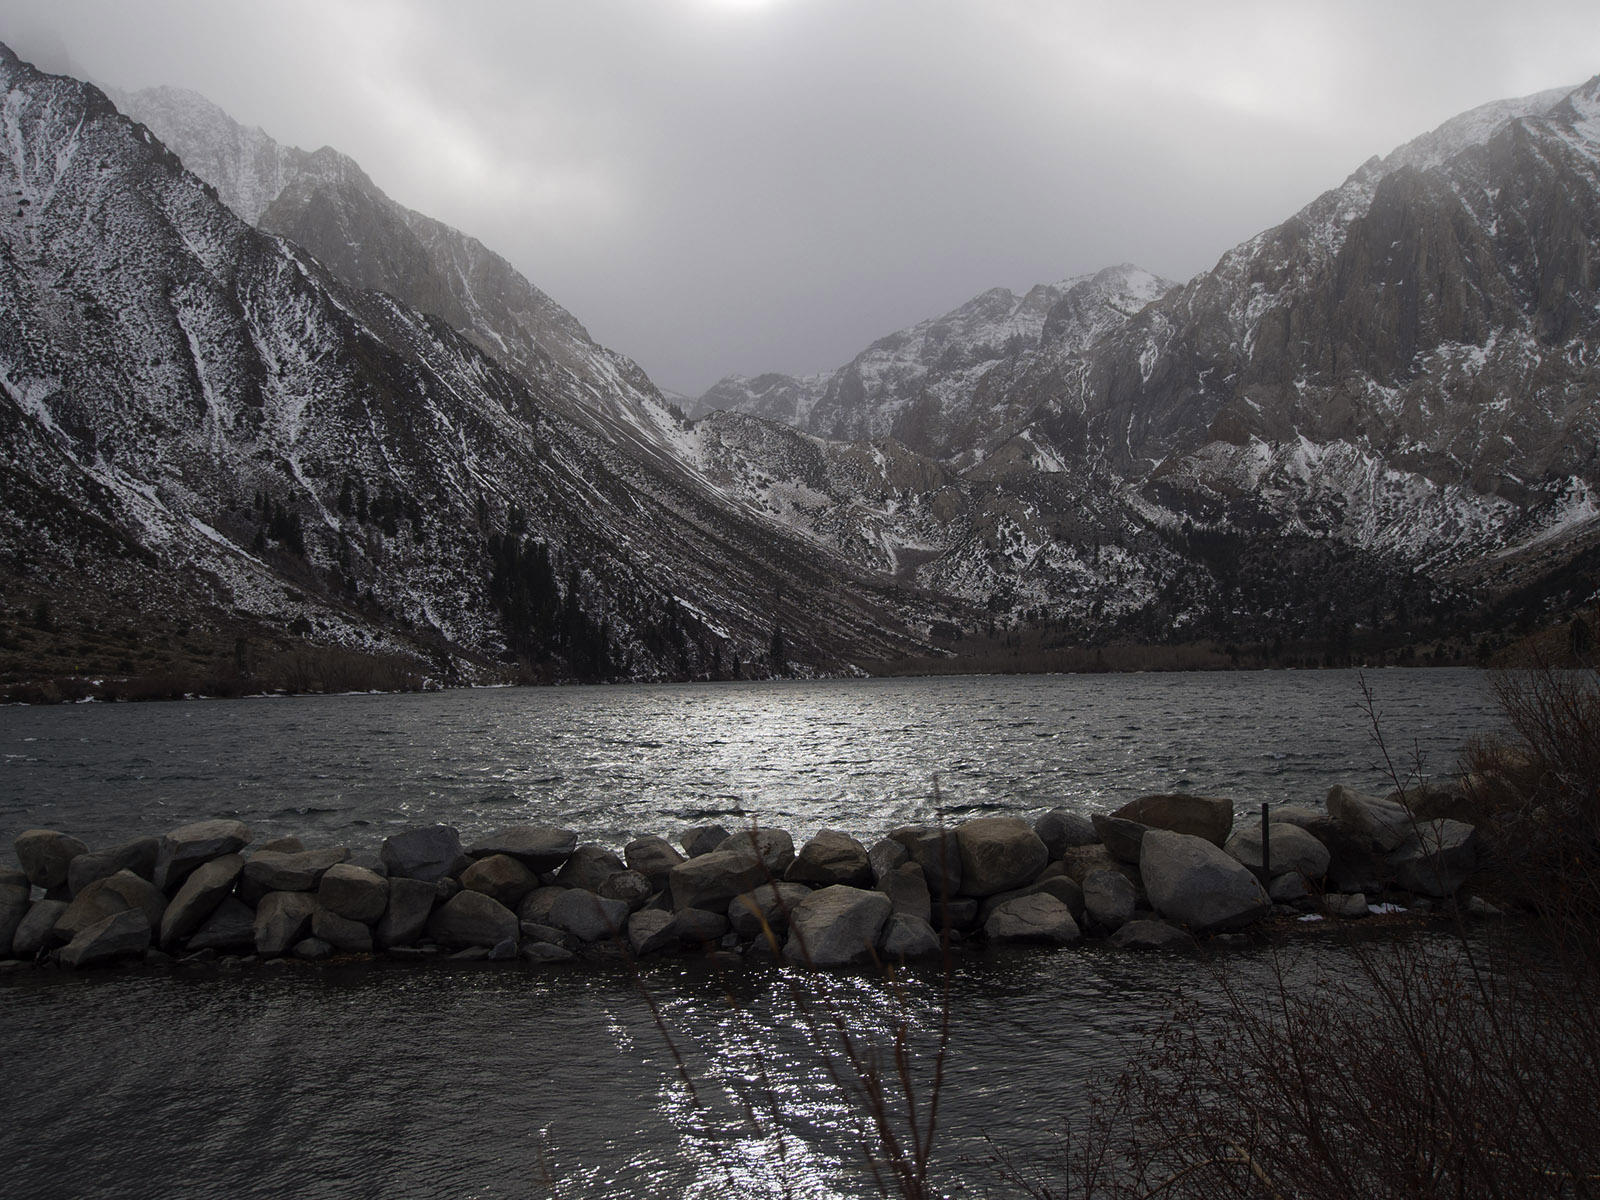 Convict Lake with the first seasonal light snow over the Sierra Nevada.  I spent time viewing the glacial moraines above the lake and nearby remnants of the Hilton Creek Fault made visible by the 1980 earthquakes in the area.